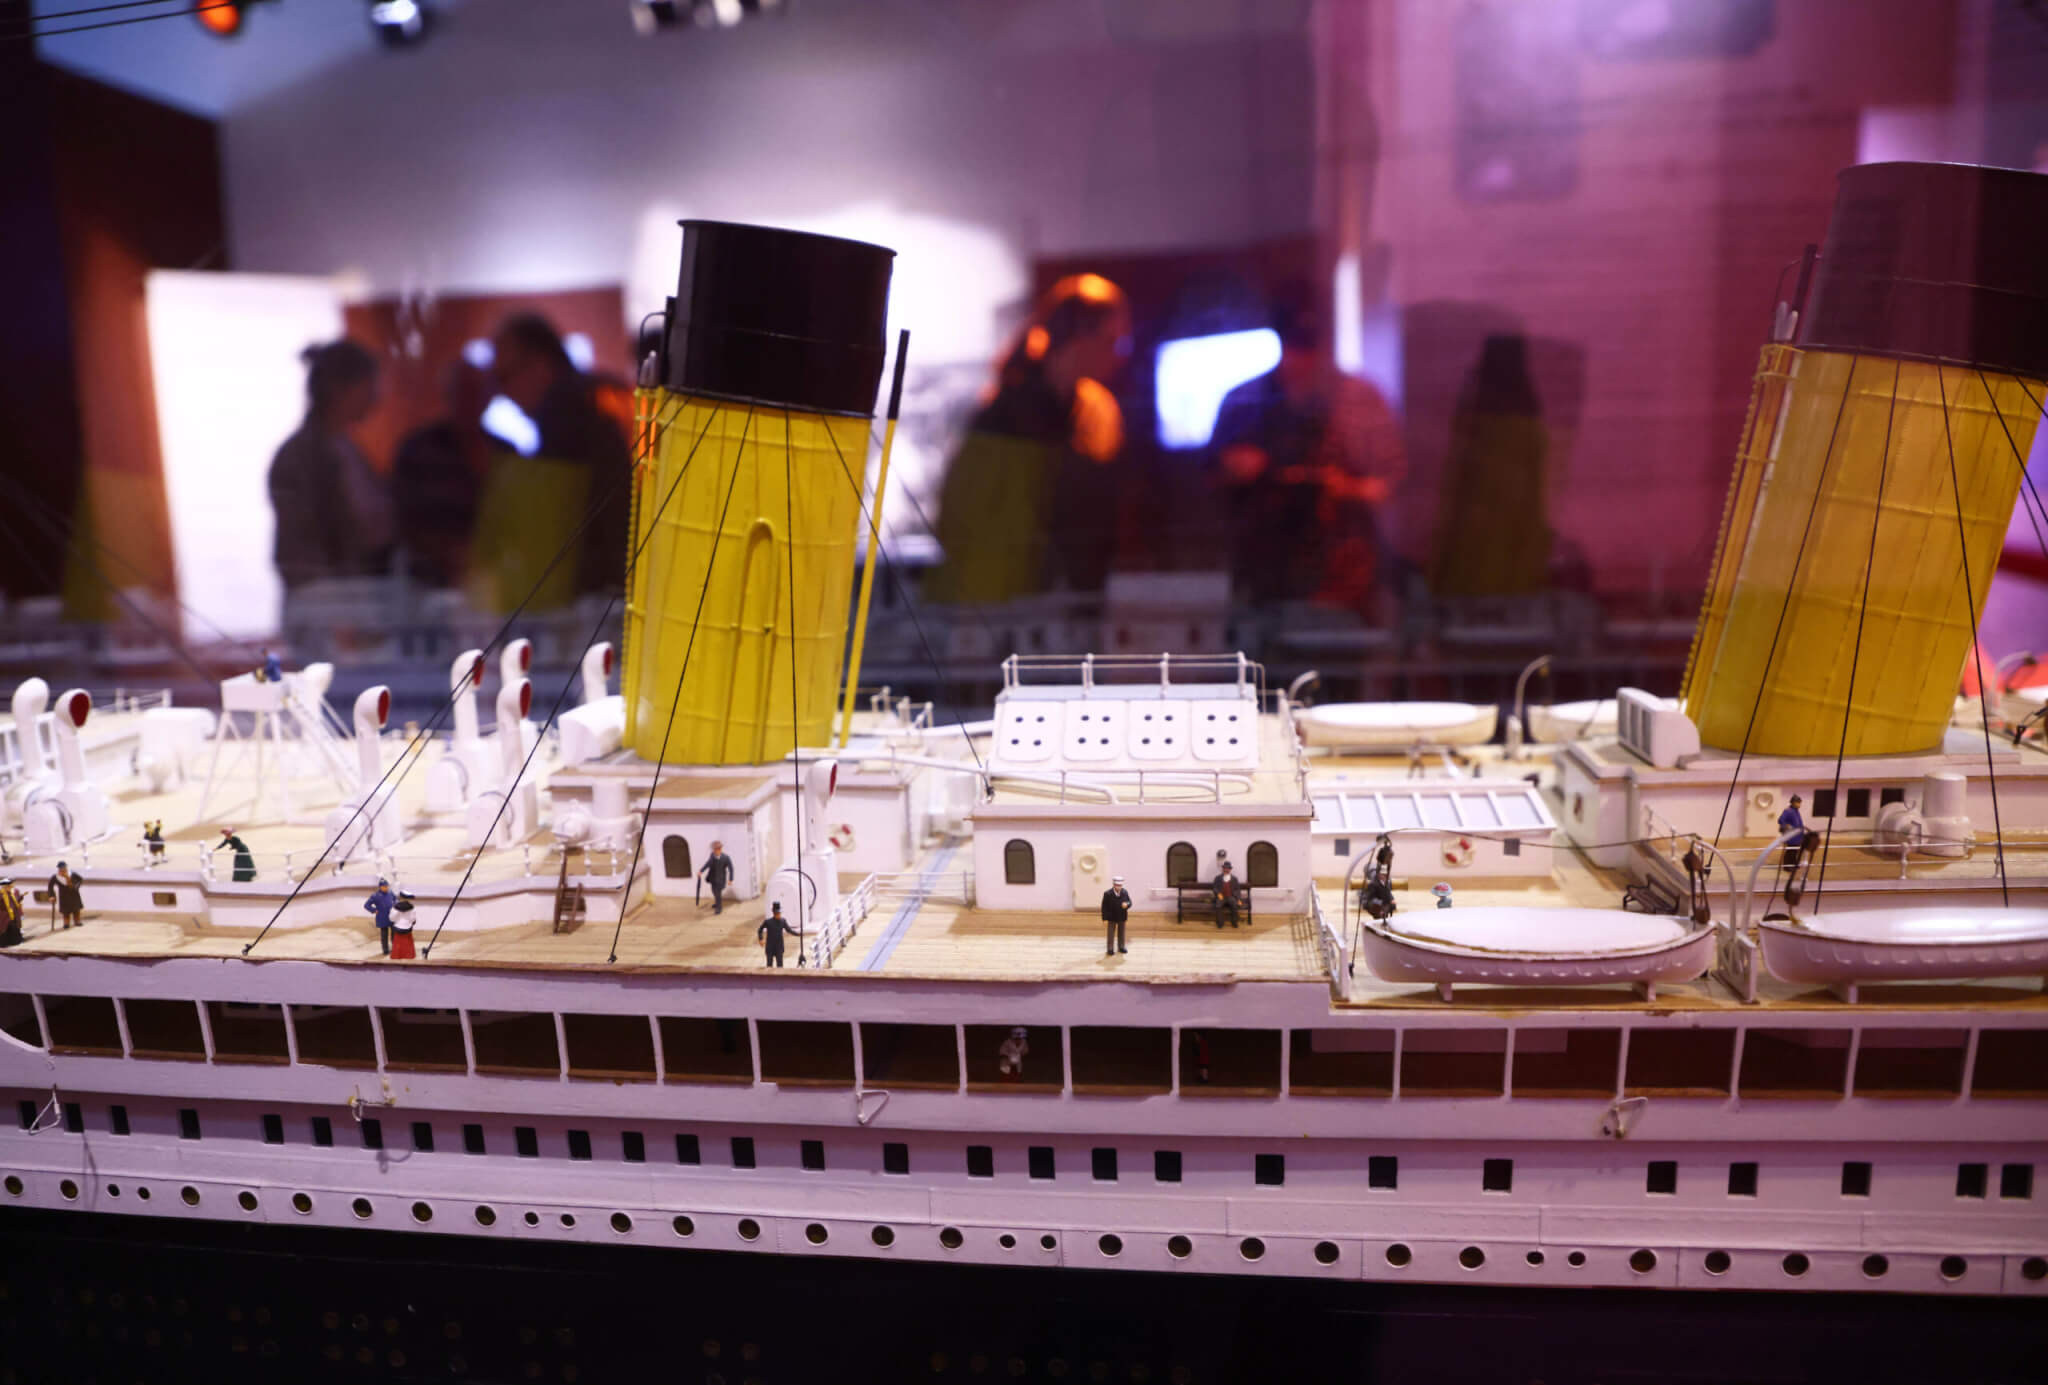 Titanic miniature boat during Friday's press screening of the Nordic premiere of the exhibition "Titanic: The Artifact Exhibition" in Linköping, Sweden. The exhibition, which displays over 200 items from the Titanic, offers an emotional journey through stories, photographs and objects in recreated interiors from the Titanic. Sweden has a strong connection to the Titanic as several Swedes emigrated to America.